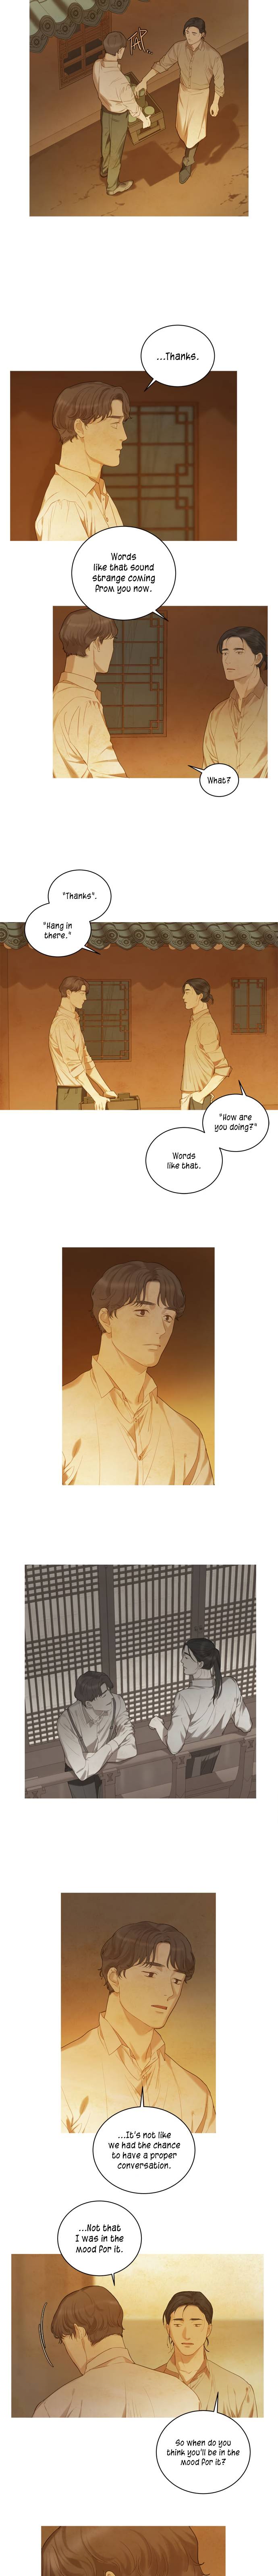 Gorae Byul - The Gyeongseong Mermaid - Chapter 43 Page 5